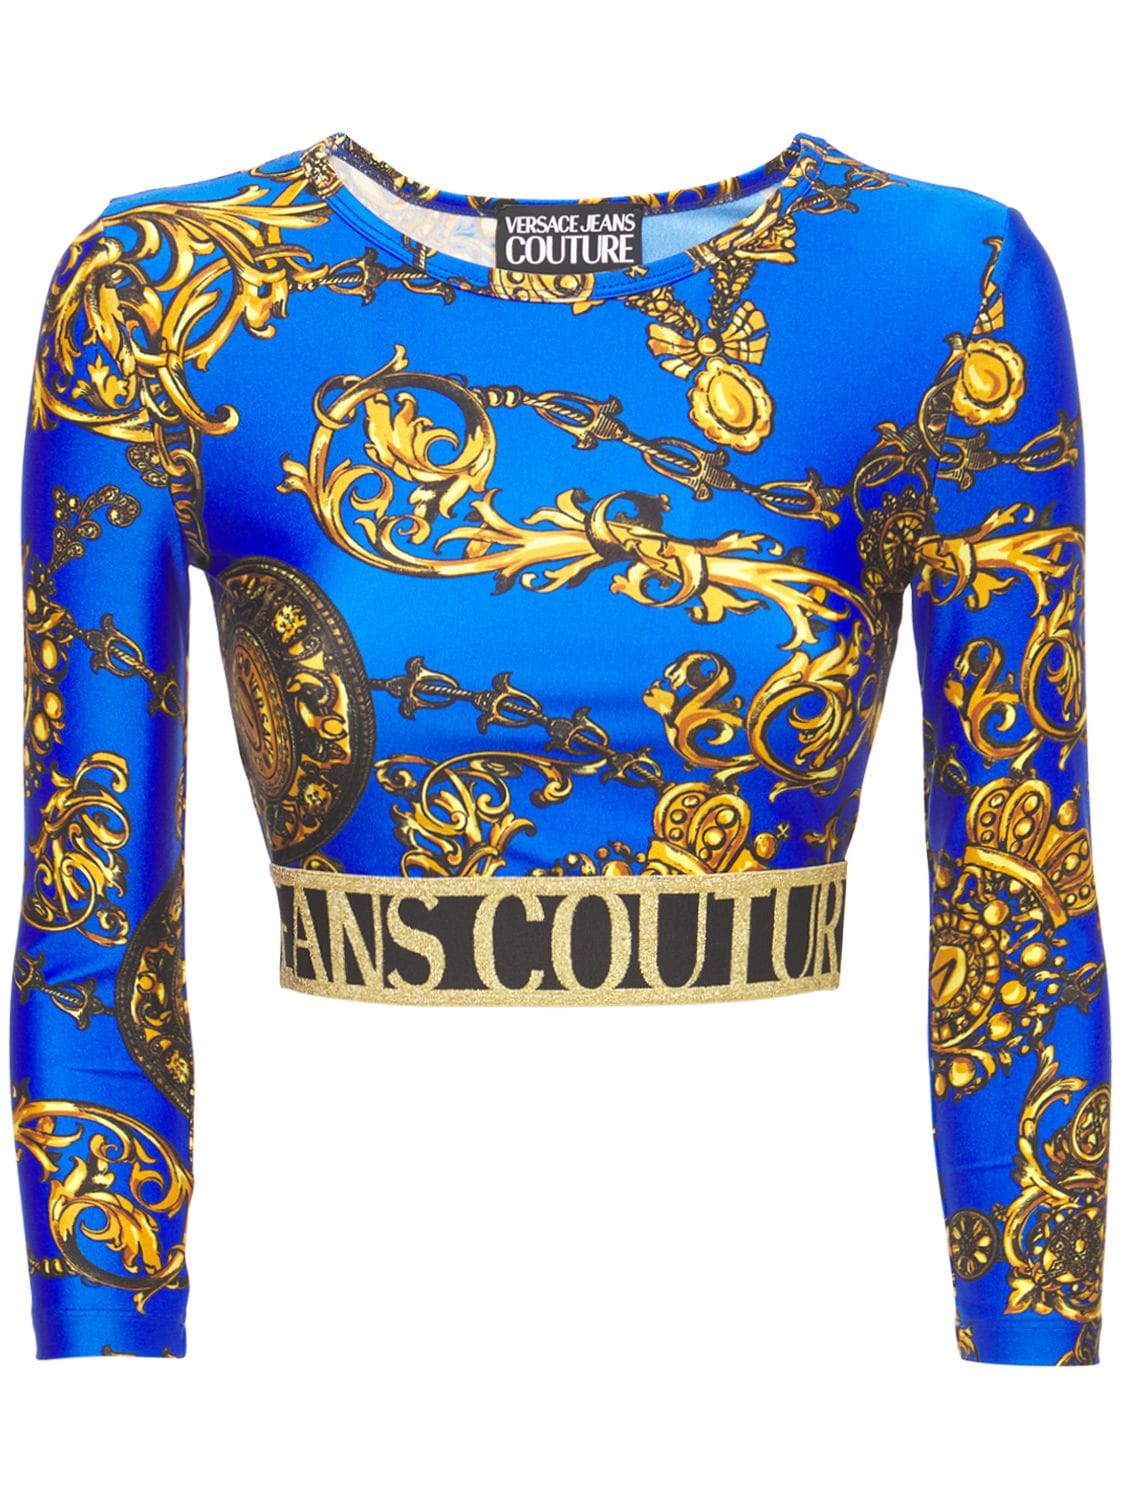 VERSACE JEANS COUTURE BAROQUE PRINT JERSEY CROPPED TOP,74IA88041-RZI00